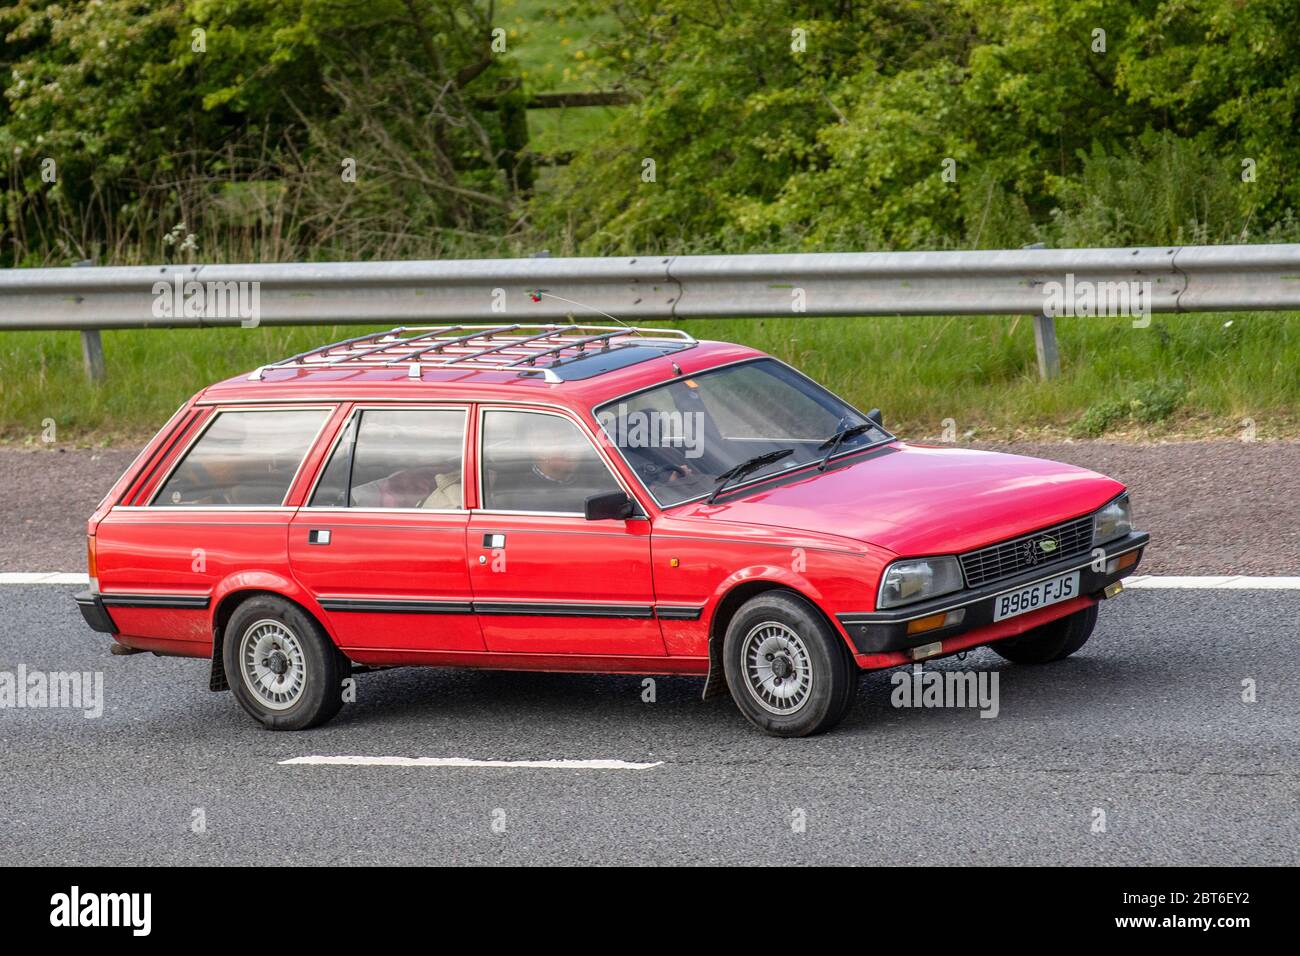 1985 80s red Peugeot 505 Family; Vehicular traffic moving vehicles, cars driving vehicle on UK roads, motors, motoring on the M61 motorway highway Stock Photo